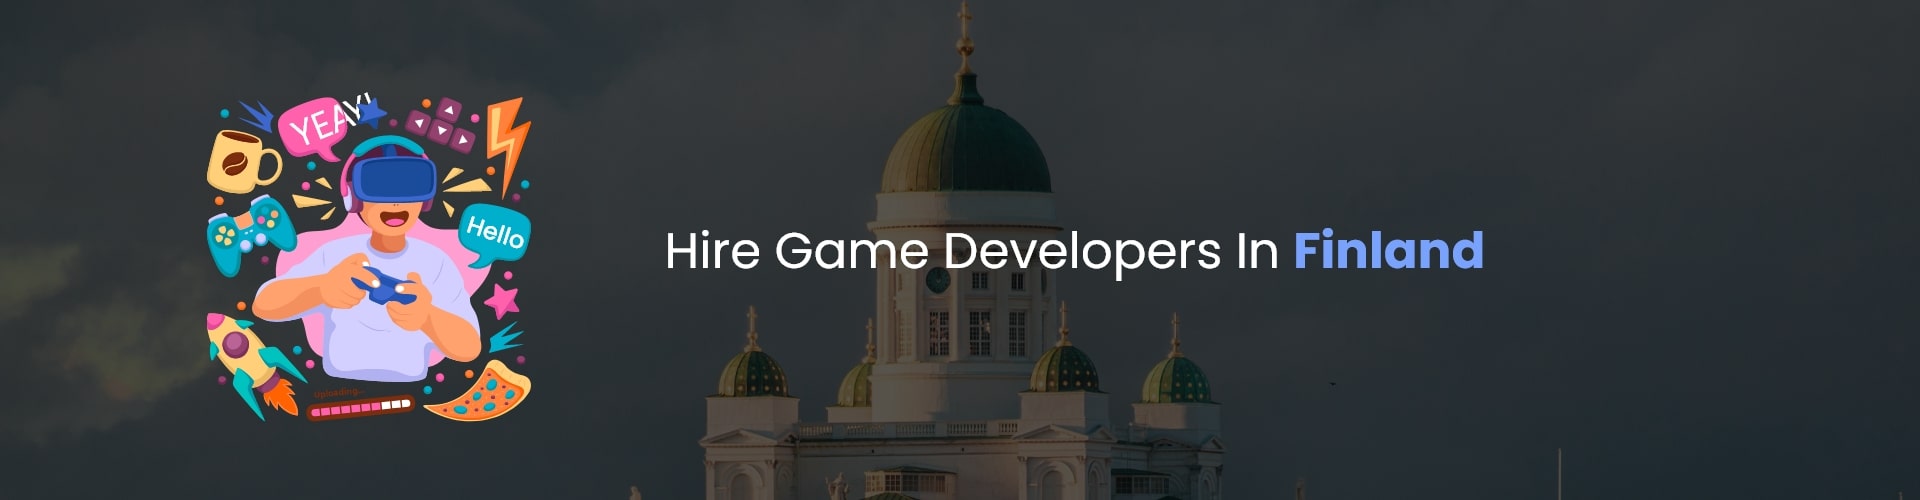 hire game developers in finland